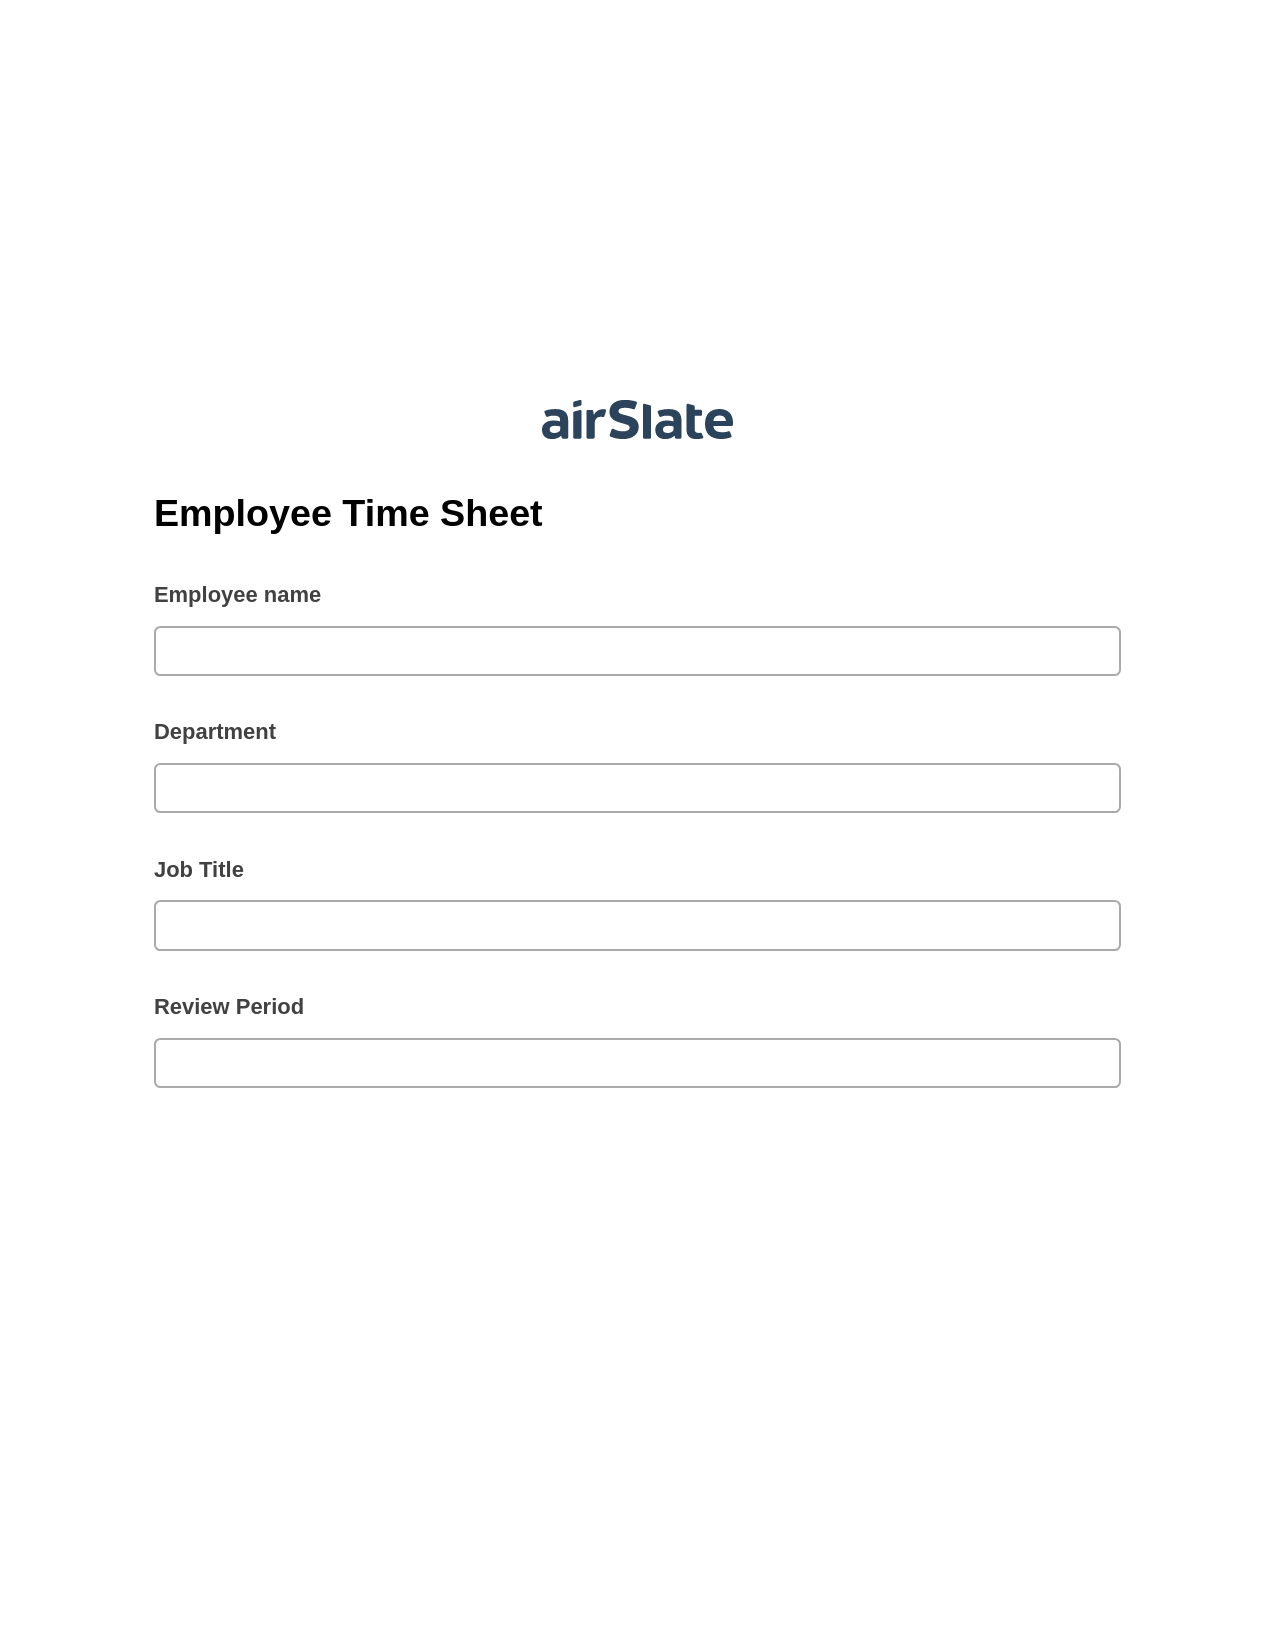 Employee Time Sheet Pre-fill Document Bot, Create Salesforce Records Bot, Export to Salesforce Record Bot